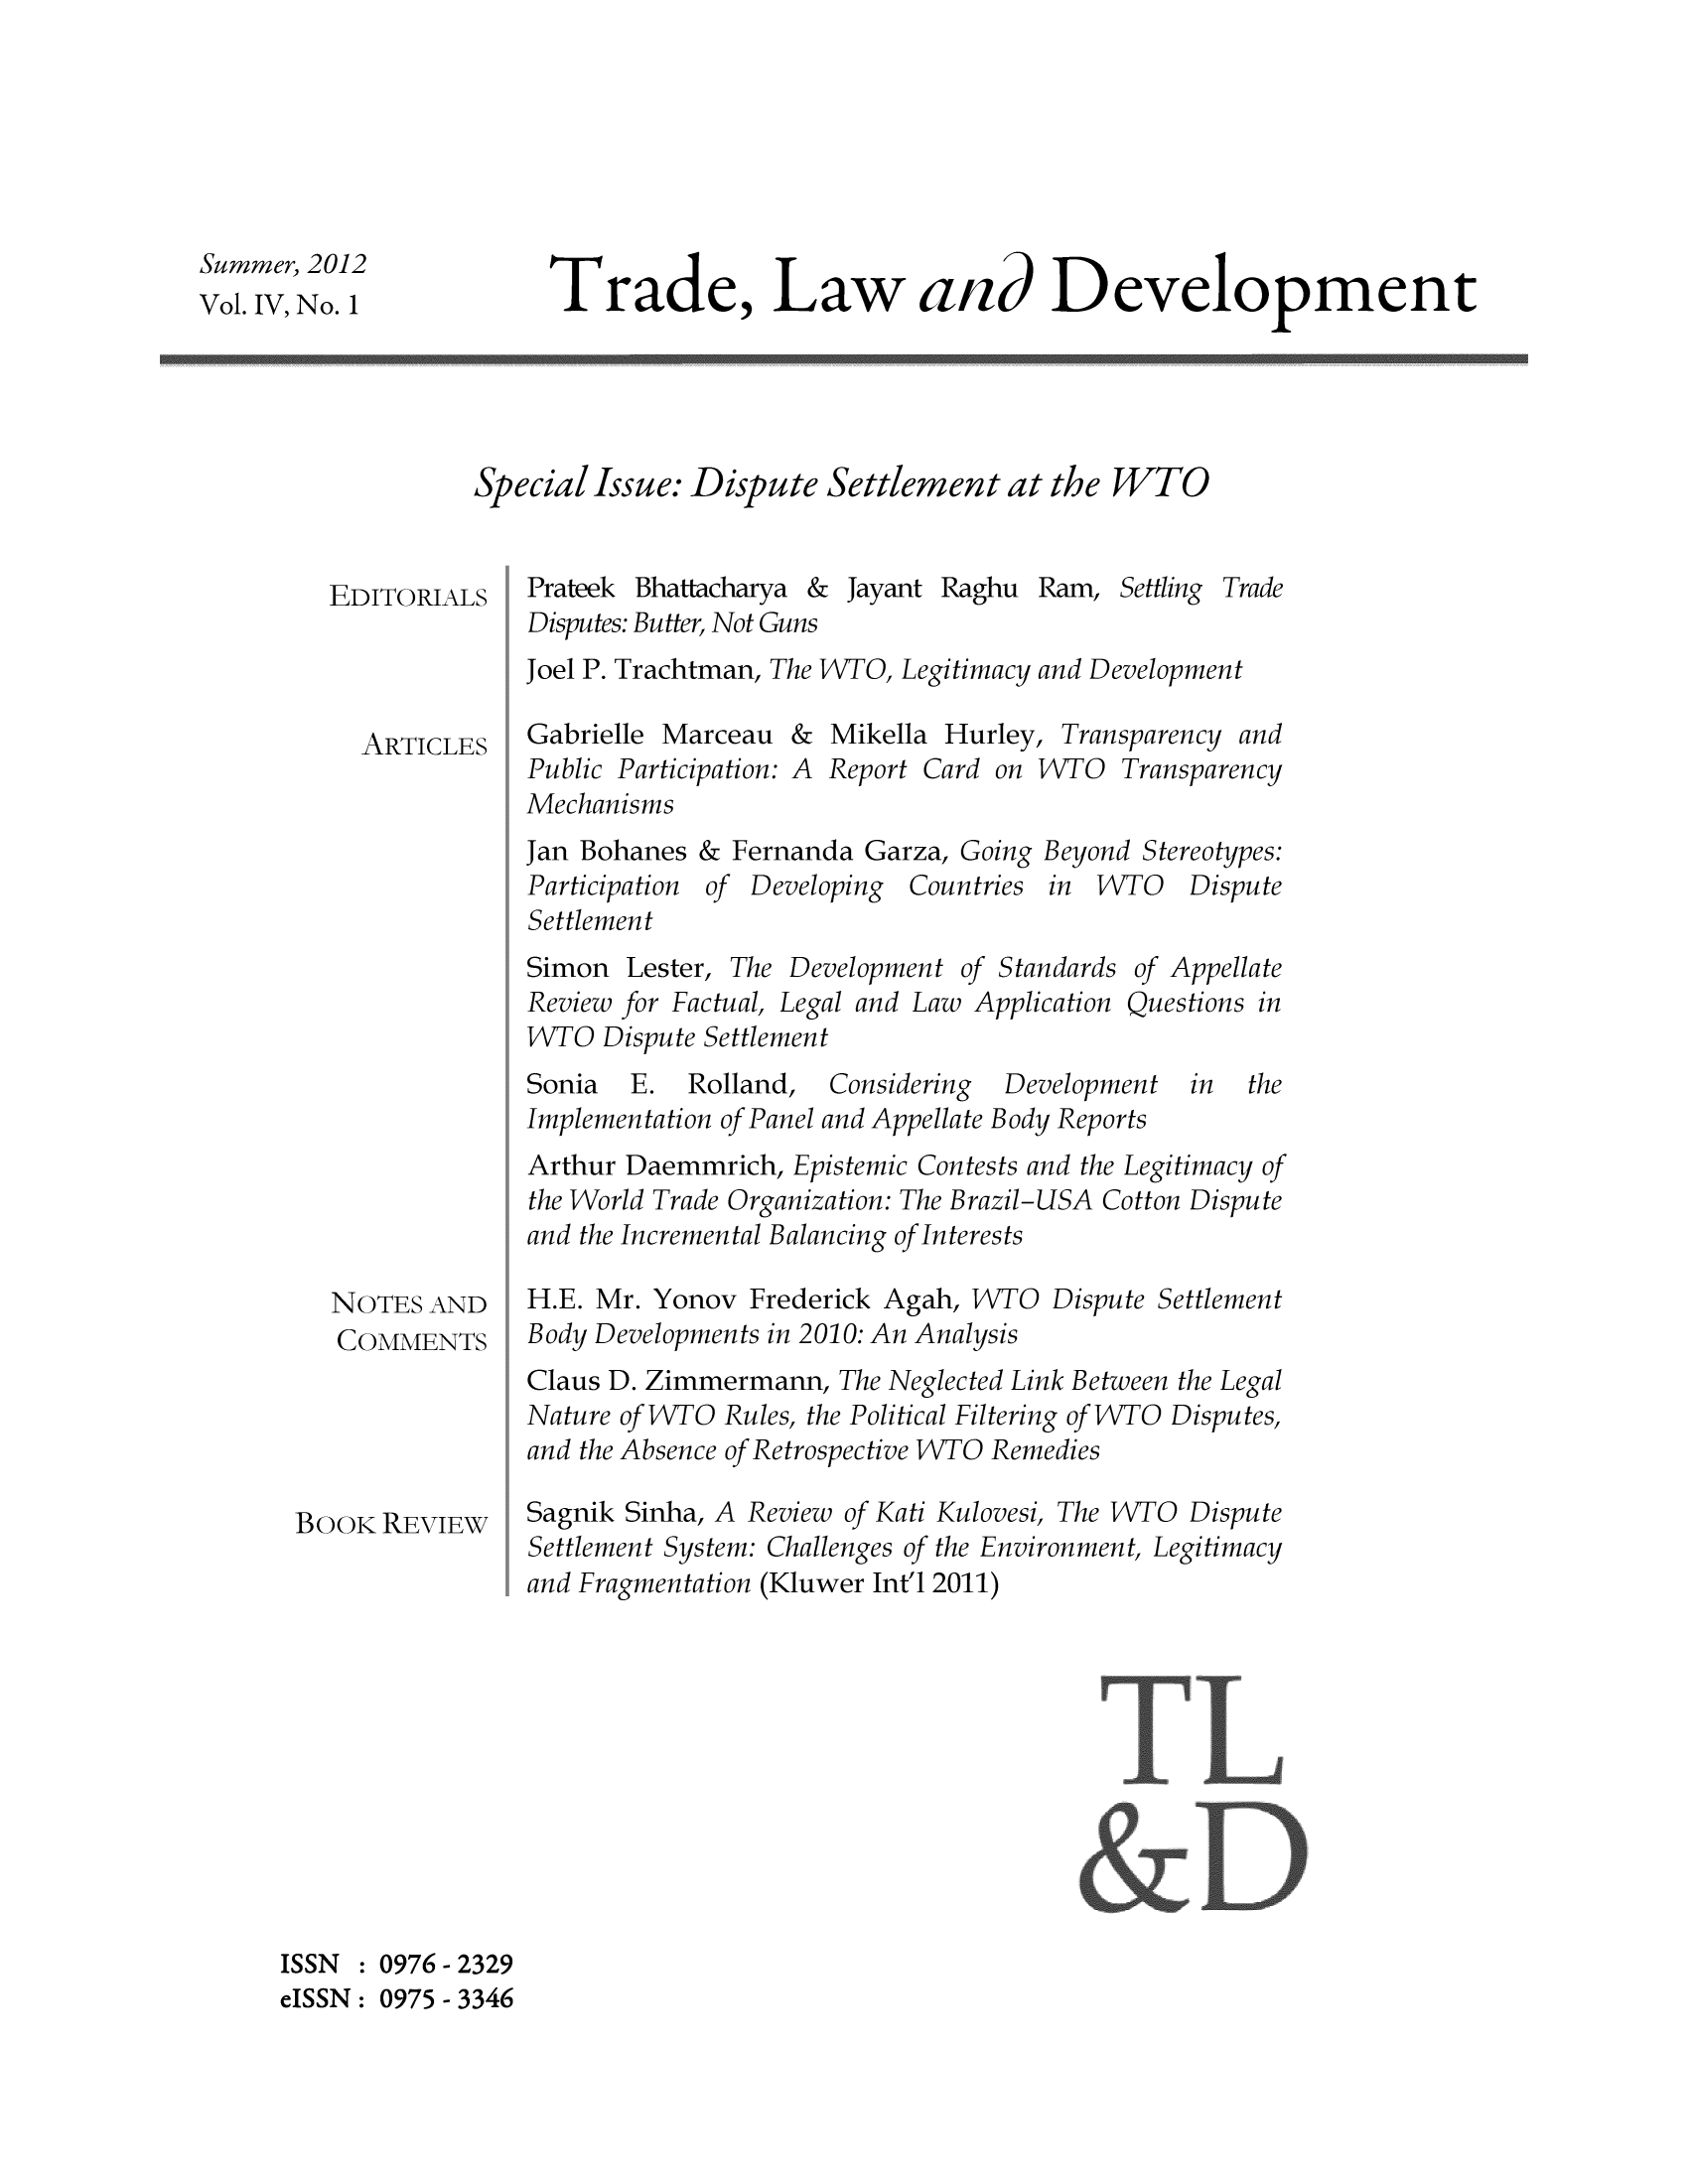 handle is hein.journals/traladpt4 and id is 1 raw text is: Summer, 2012
Vol. IV, No.1

Trade, Law and Development

Special Issue: Dispute Settlement at the WTO

EDITORIALS

Prateek Bhattacharya & Jayant Raghu Ram, Settling Trade
Disputes: Butter, Not Guns

Joel P. Trachtman, The 1VTO, Legitimacy and Development
ARTICLES    Gabrielle Marceau & Mikella Hurley, Transparency and
Public Participation: A Report Card on VTO Transparency
Mechanisms
Jan Bohanes & Fernanda Garza, Going Beyond Stereotypes:
Participation of Developing Countries in VVTO Dispute
Settlement
Simon Lester, The Development of Standards of Appellate
Review for Factual, Legal and Law Application Questions in
VVTO Dispute Settlement

Sonia E. Rolland, Considering Development in
Implementation of Panel and Appellate Body Reports

the

NOTES AND
COMMENTS

BOOK REVIEW

Arthur Daemmrich, Epistemic Contests and the Legitimacy of
the World Trade Organization: The Brazil-USA Cotton Dispute
and the Incremental Balancing of Interests
H.E. Mr. Yonov Frederick Agah, VVTO Dispute Settlement
Body Developments in 2010: An Analysis
Claus D. Zimmermann, The Neglected Link Between the Legal
Nature of VTO Rules, the Political Filtering of VTO Disputes,
and the Absence of Retrospective VVTO Remedies
Sagnik Sinha, A Review of Kati Kulovesi, The 1NTO Dispute
Settlement System: Challenges of the Environment, Legitimacy
and Fragmentation (Kluwer Int'l 2011)

ISSN : 0976 - 2329
eISSN: 0975 - 3346


